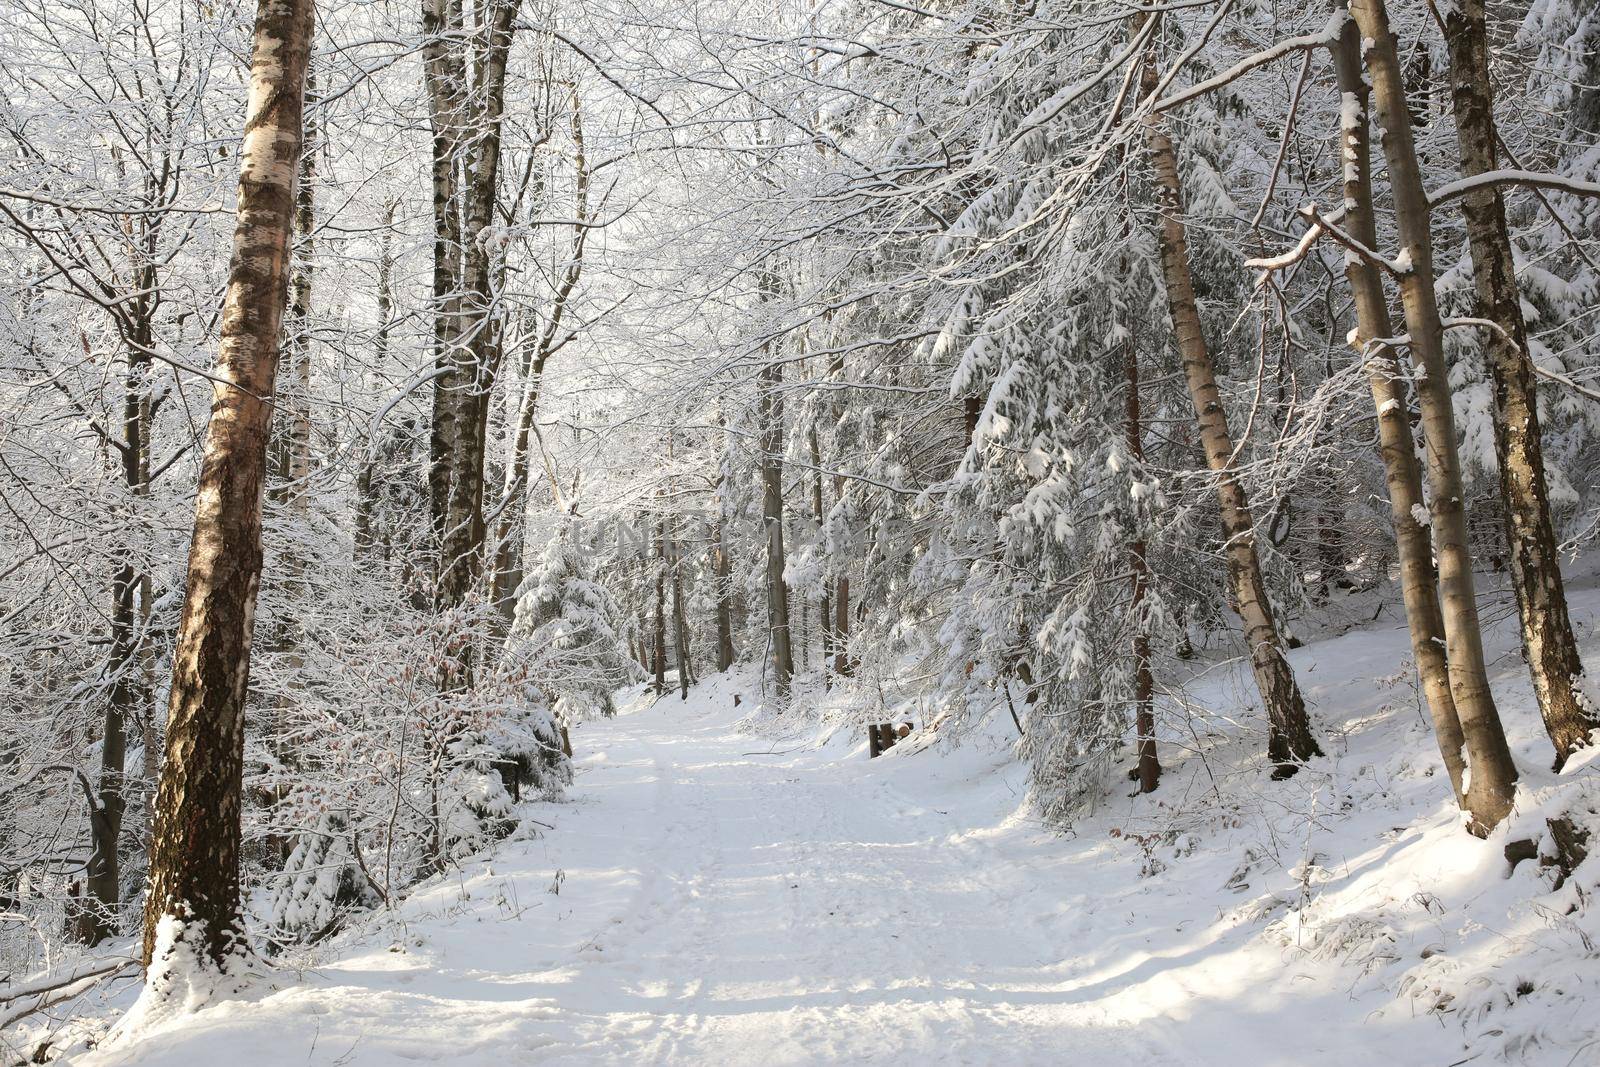 Forest path in winter scenery.